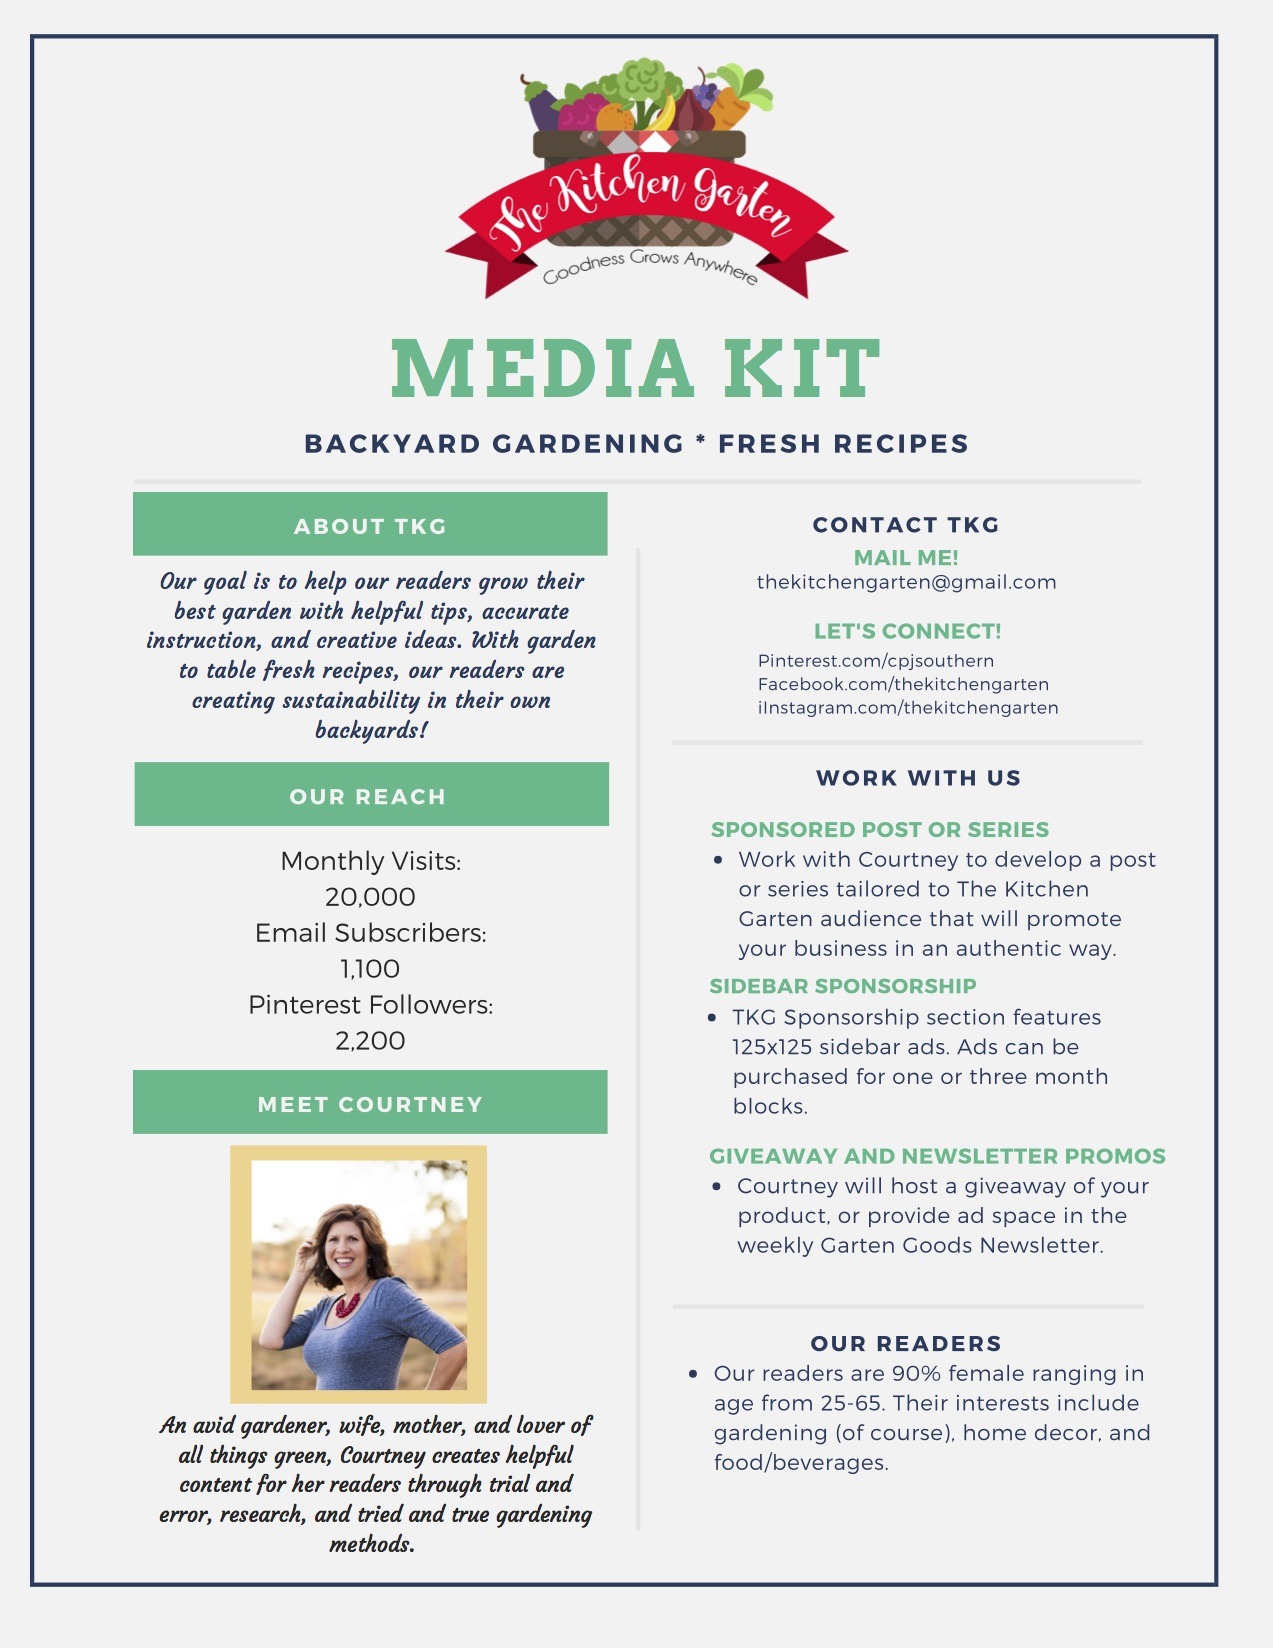 Ready to start treating your blog as business and begin working with brands? Having a media kit will be super important and may seem overwhelming, but in this post we are teaching you how to create a media kit in 3 easy steps! #eliteblogacademy #bloggingtips #makemoneyblogging #makemoneyfromhome